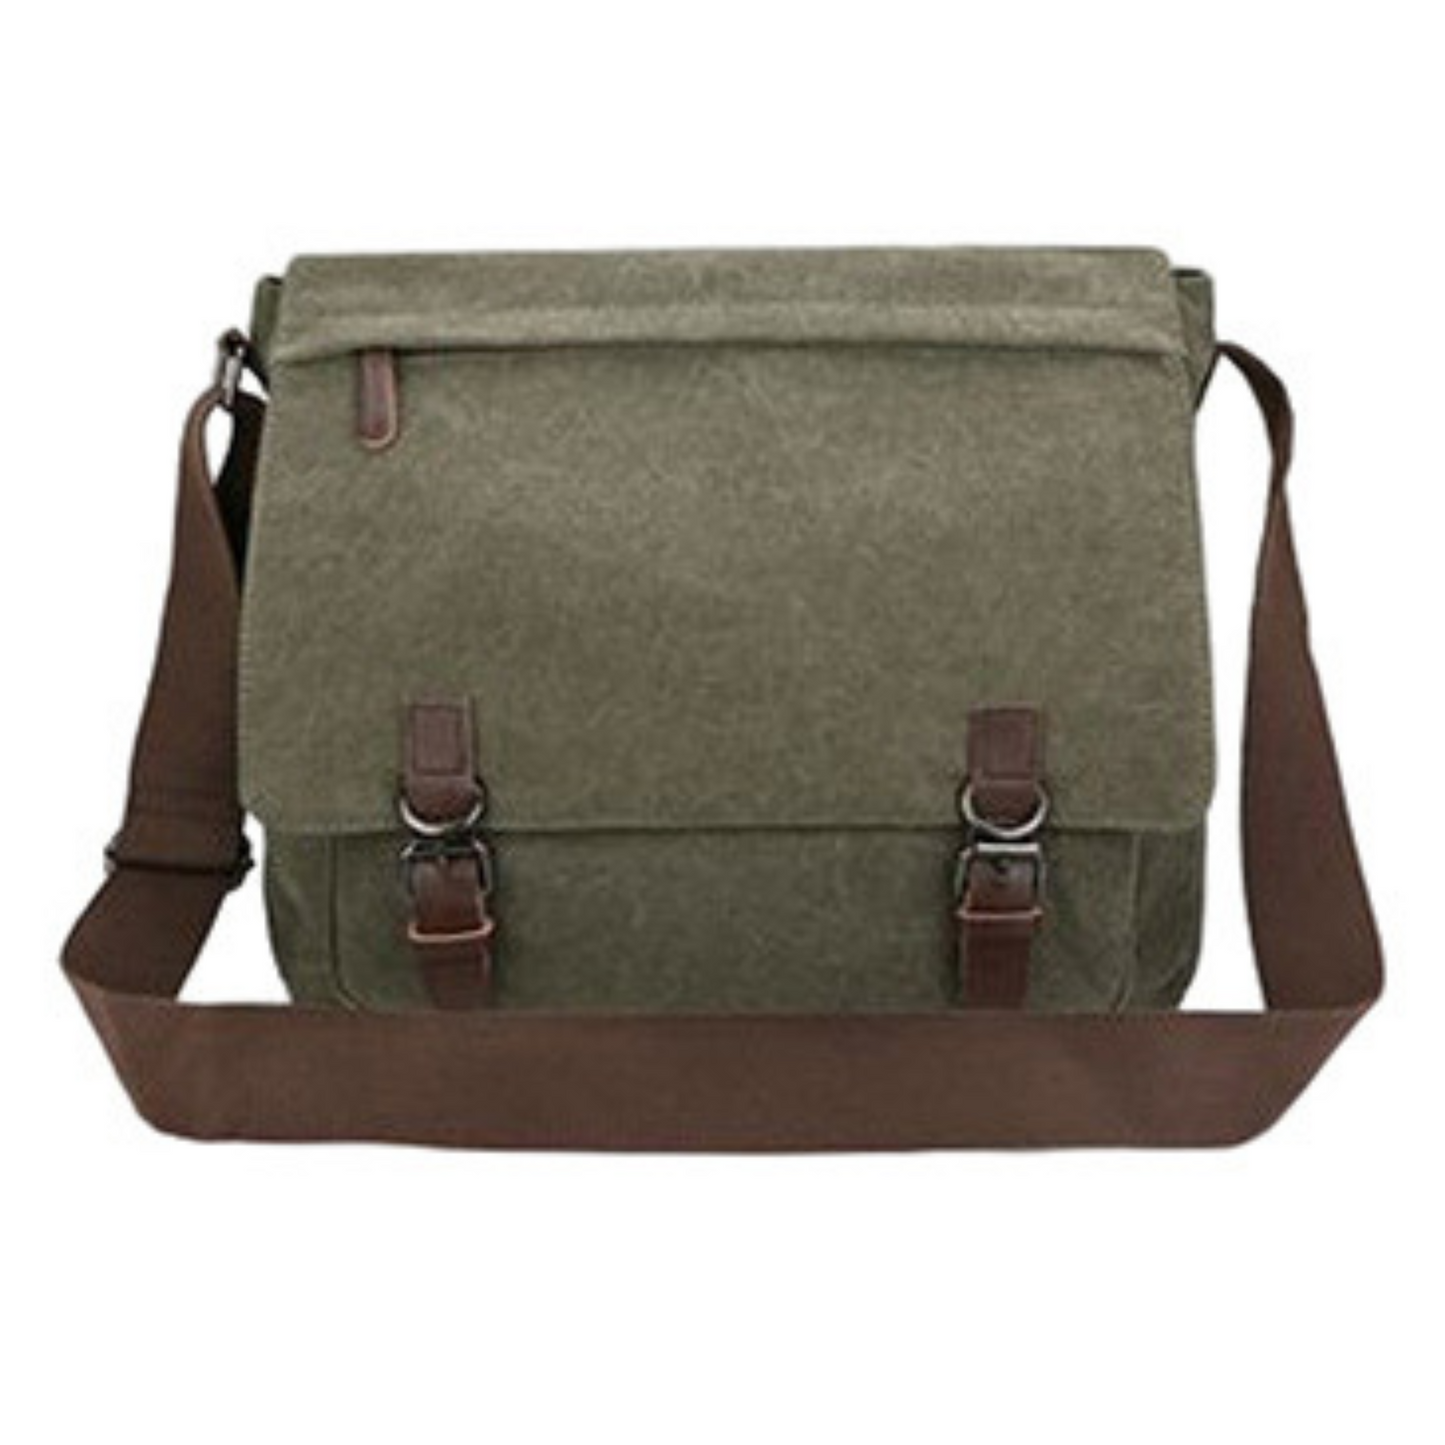 Large 15" Canvas Cross Body Messenger Satchel and Computer Travel Bag